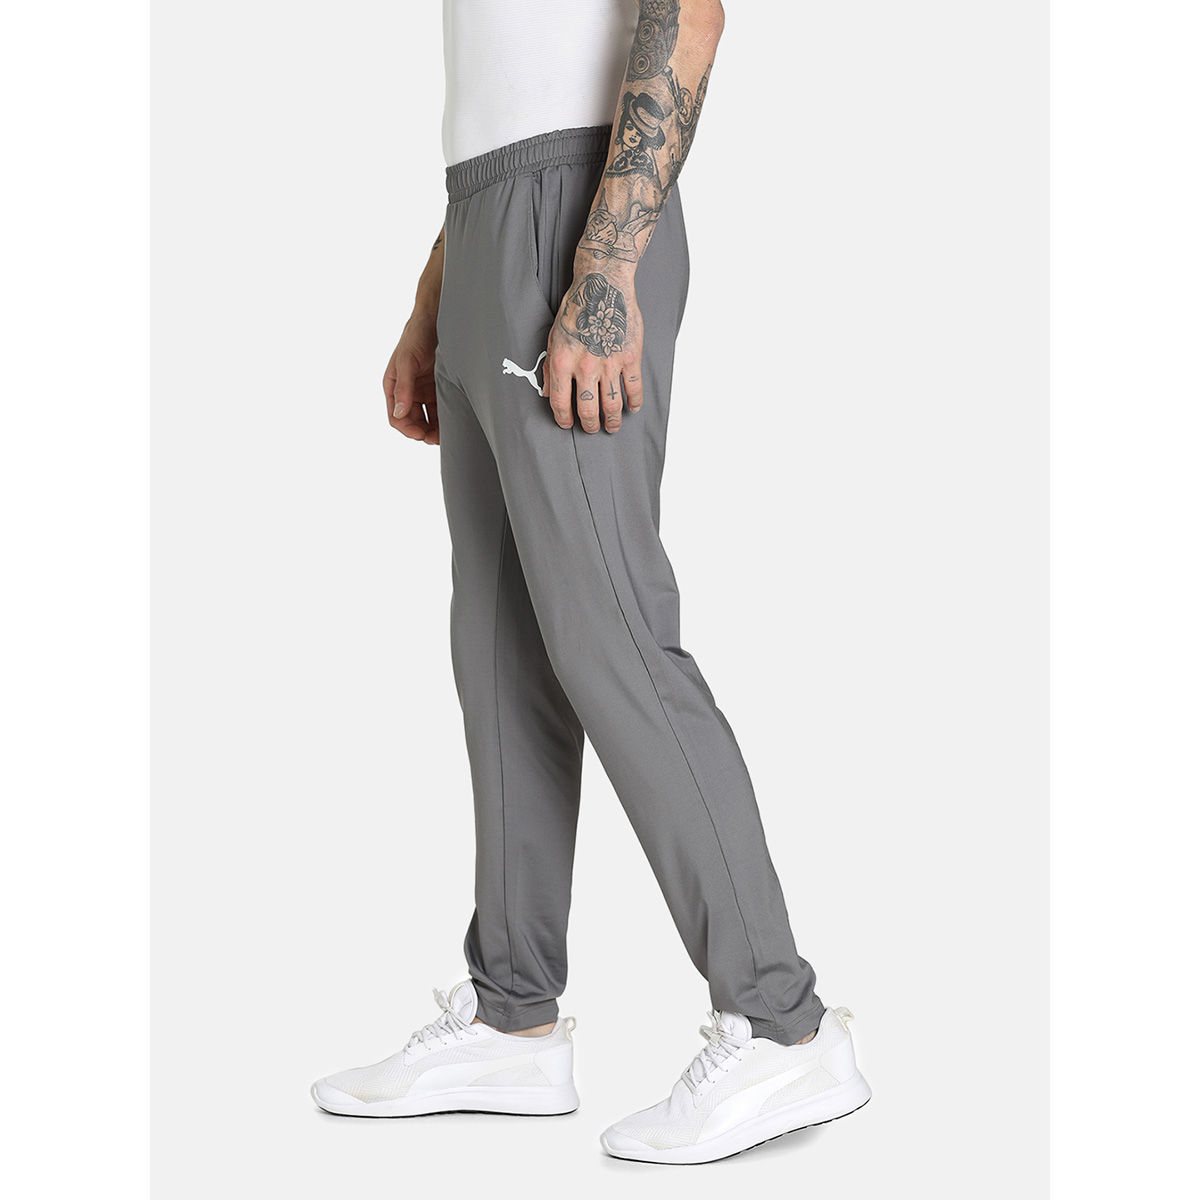 Buy the best types of sports pants at a cheap price - Arad Branding